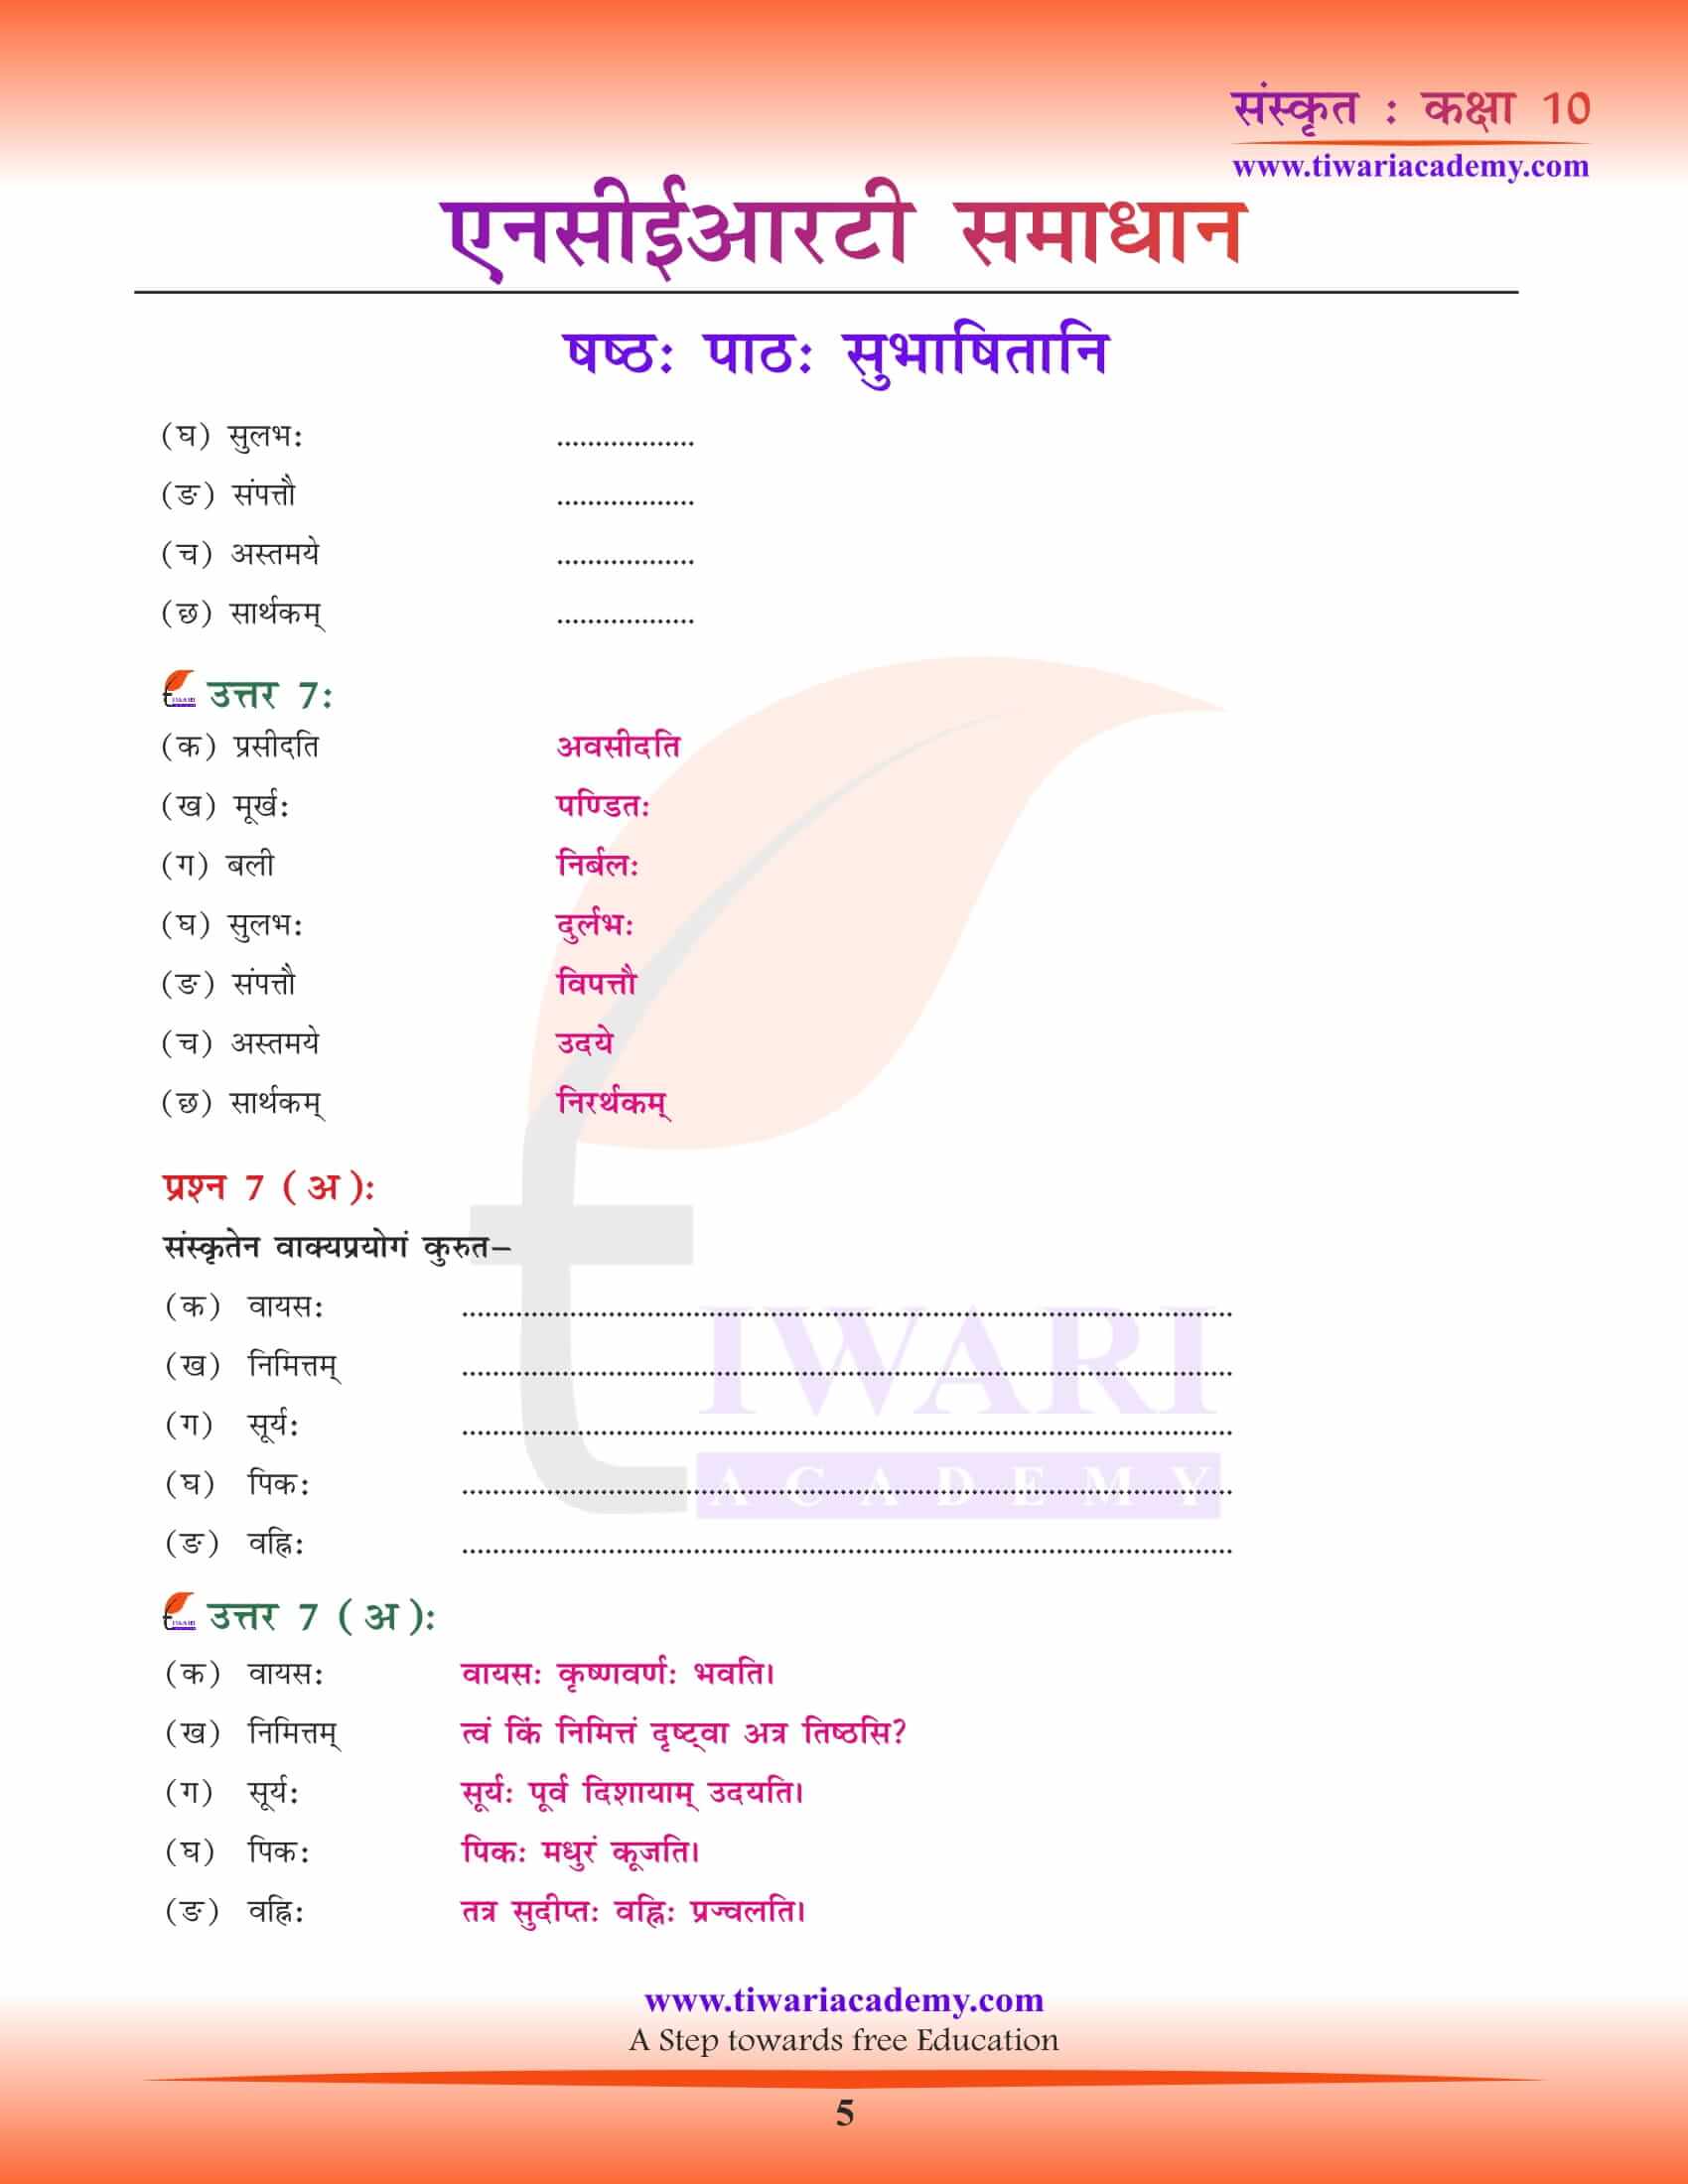 NCERT Solutions for class 10 Sanskrit Chapter 6 all answers